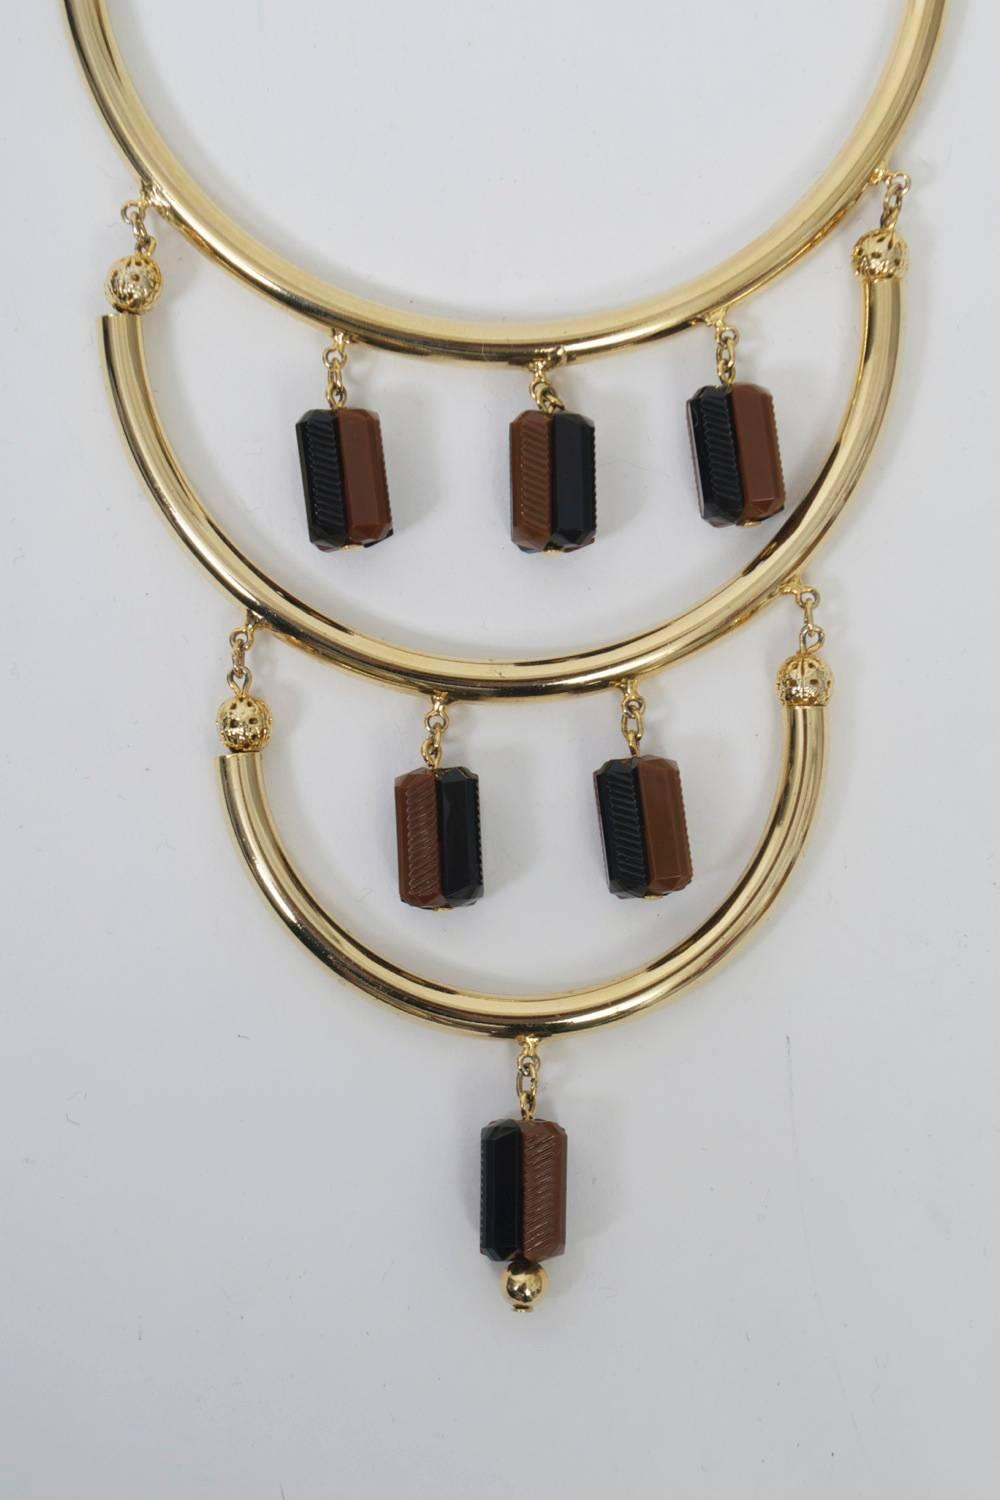 Tiered goldtone necklace by Hobé consisting of graduated half-circle tubes, the top through which the chain passes. Each tube suspends squared beads, half black, half brown. Signed oval plaque near clasp.